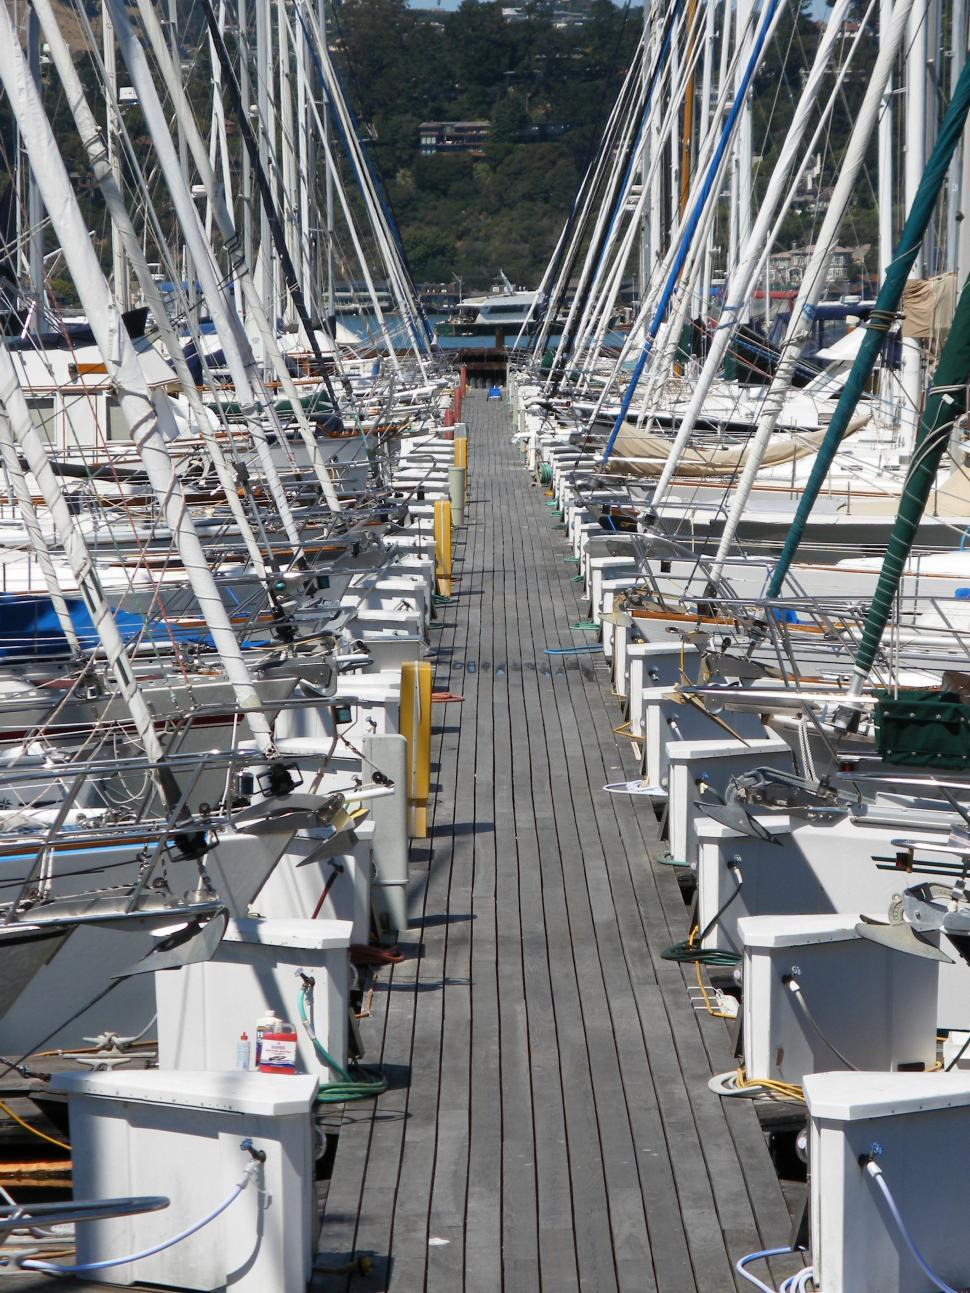 Free Image of Row of Sailboats on Pier 